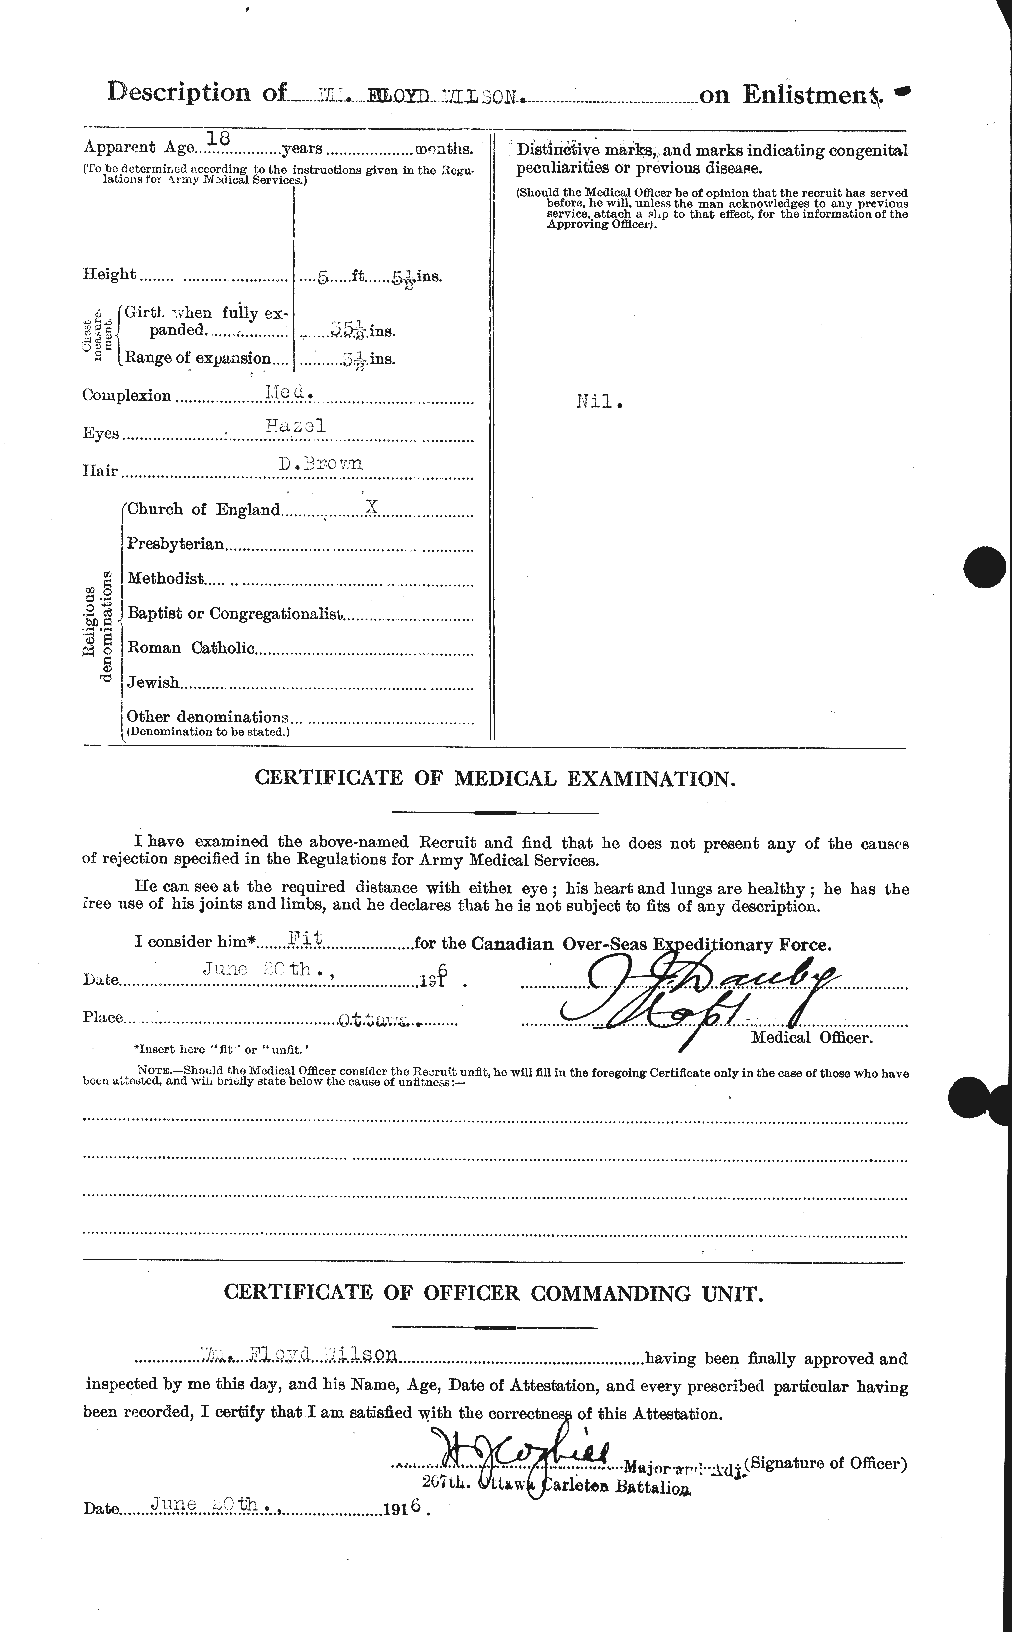 Personnel Records of the First World War - CEF 681988b